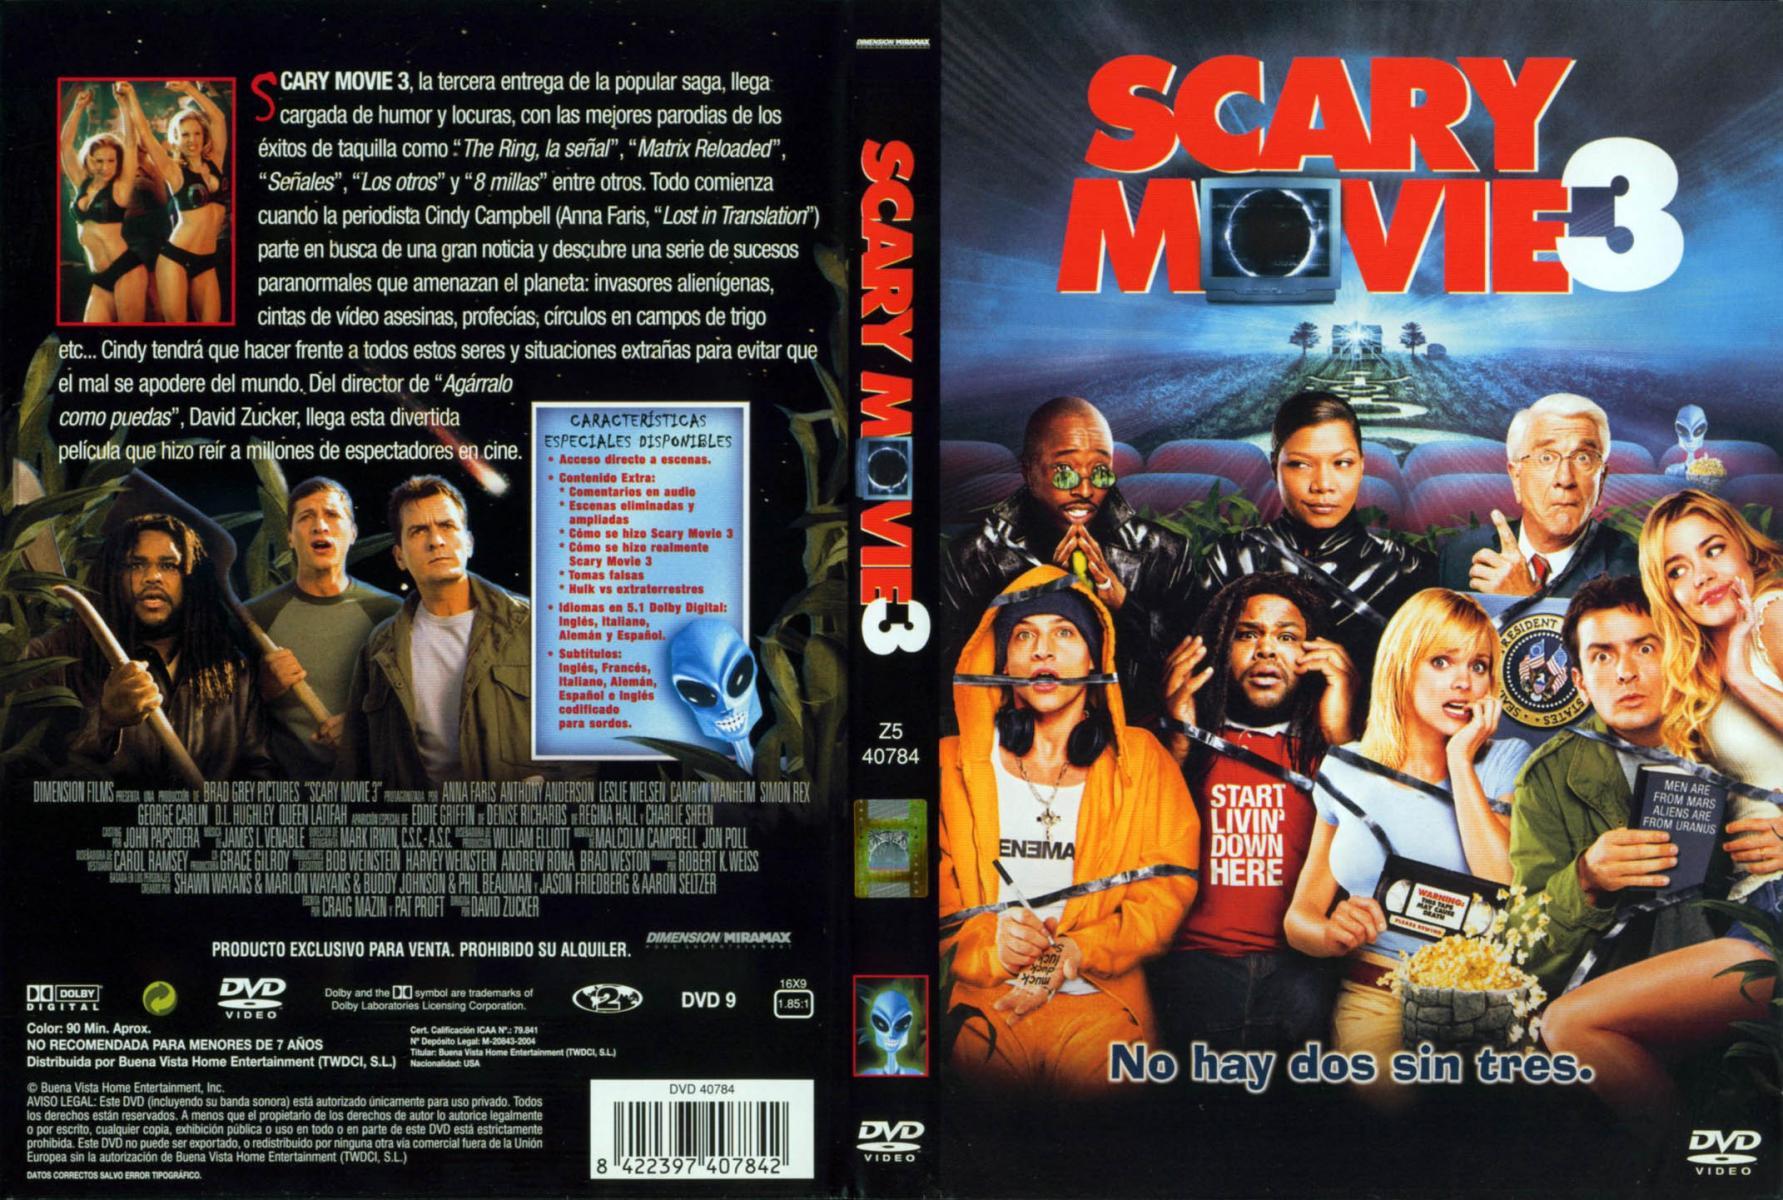 Image gallery for Scary Movie 3 - FilmAffinity